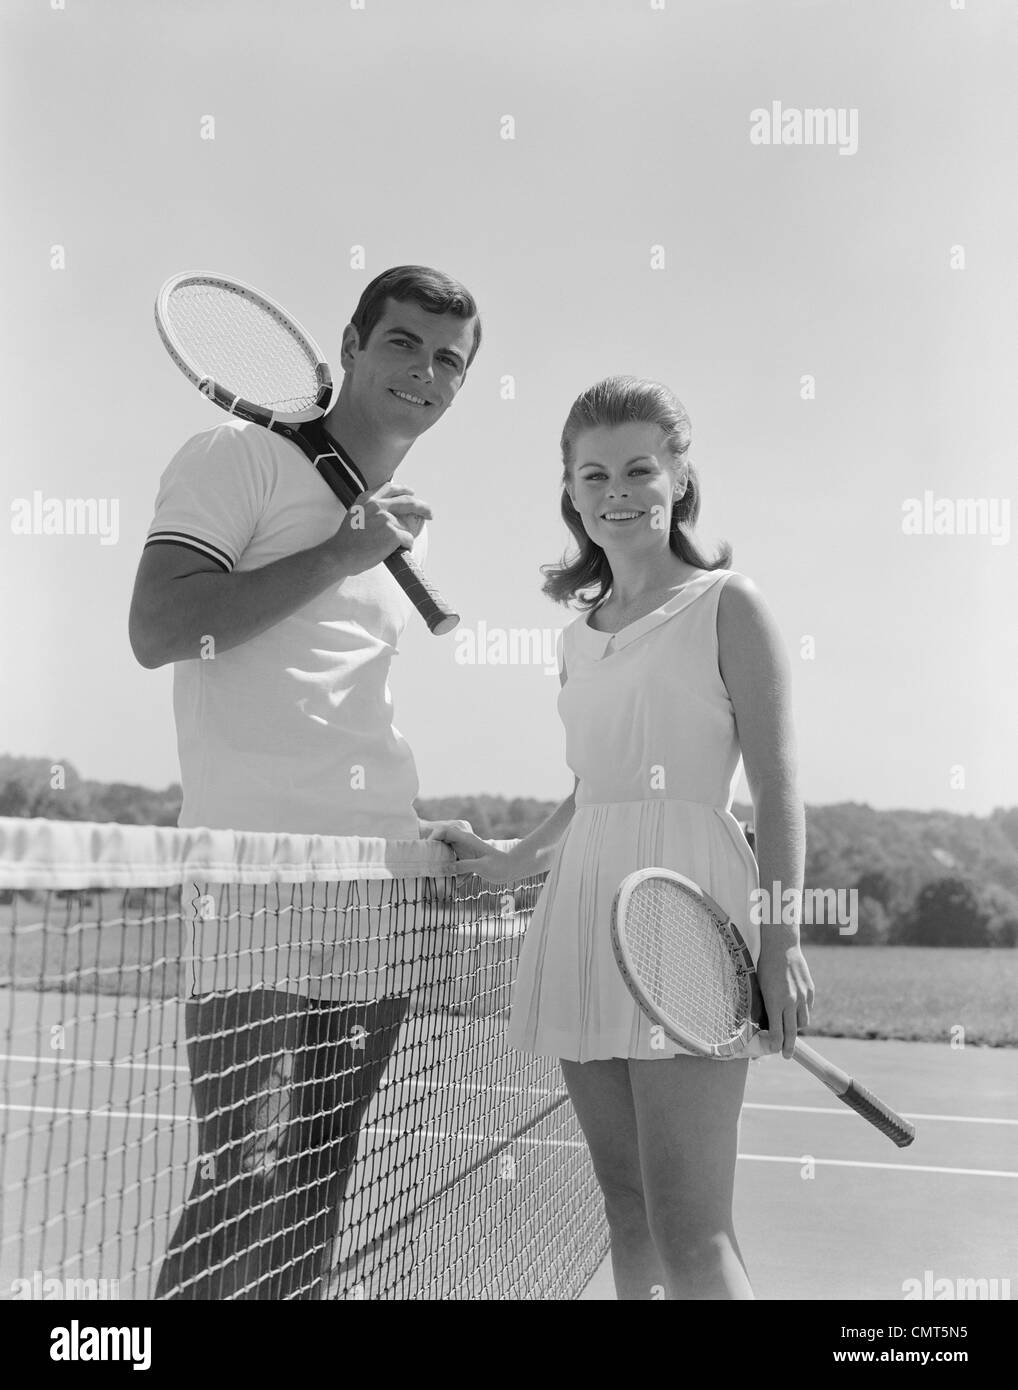 1960s PORTRAIT TENNIS COUPLE MAN WOMAN HOLDING RACQUETS STANDING BY NET Stock Photo